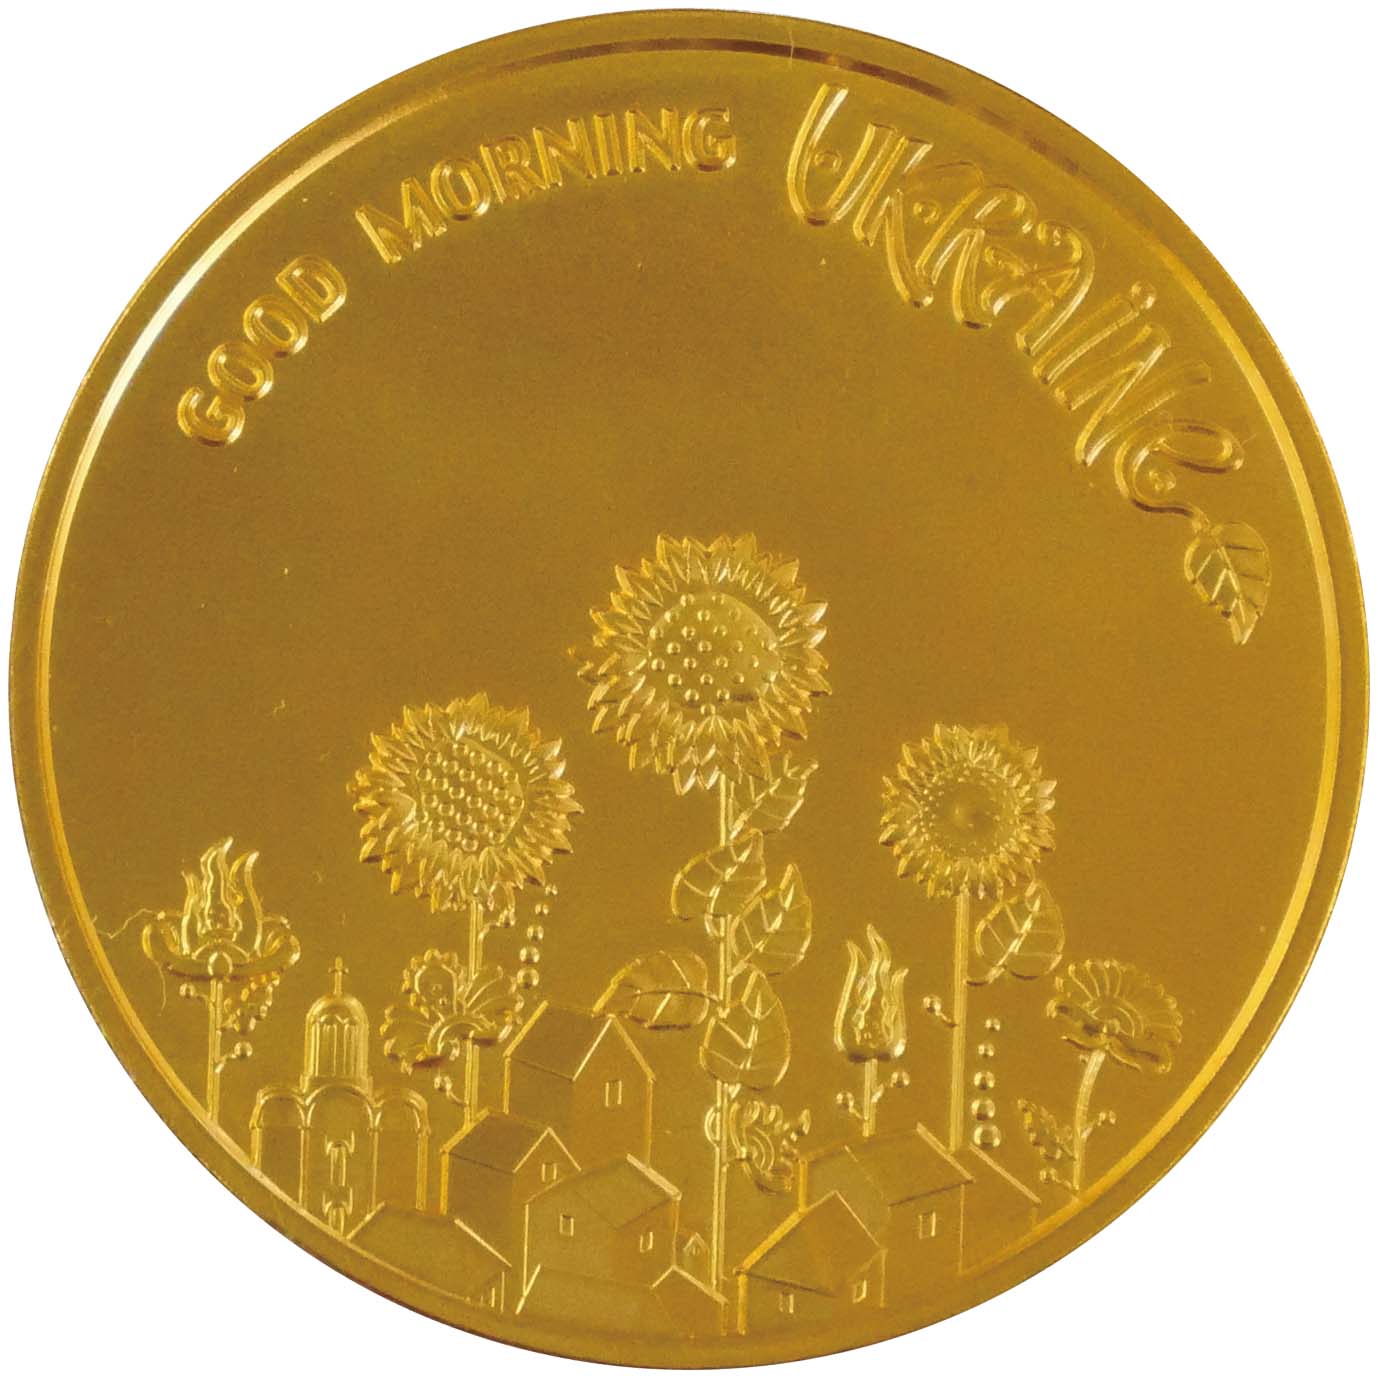 Image of International Coin Design Competition 2022 “Most Excellent Work” Gold Medal Reverse